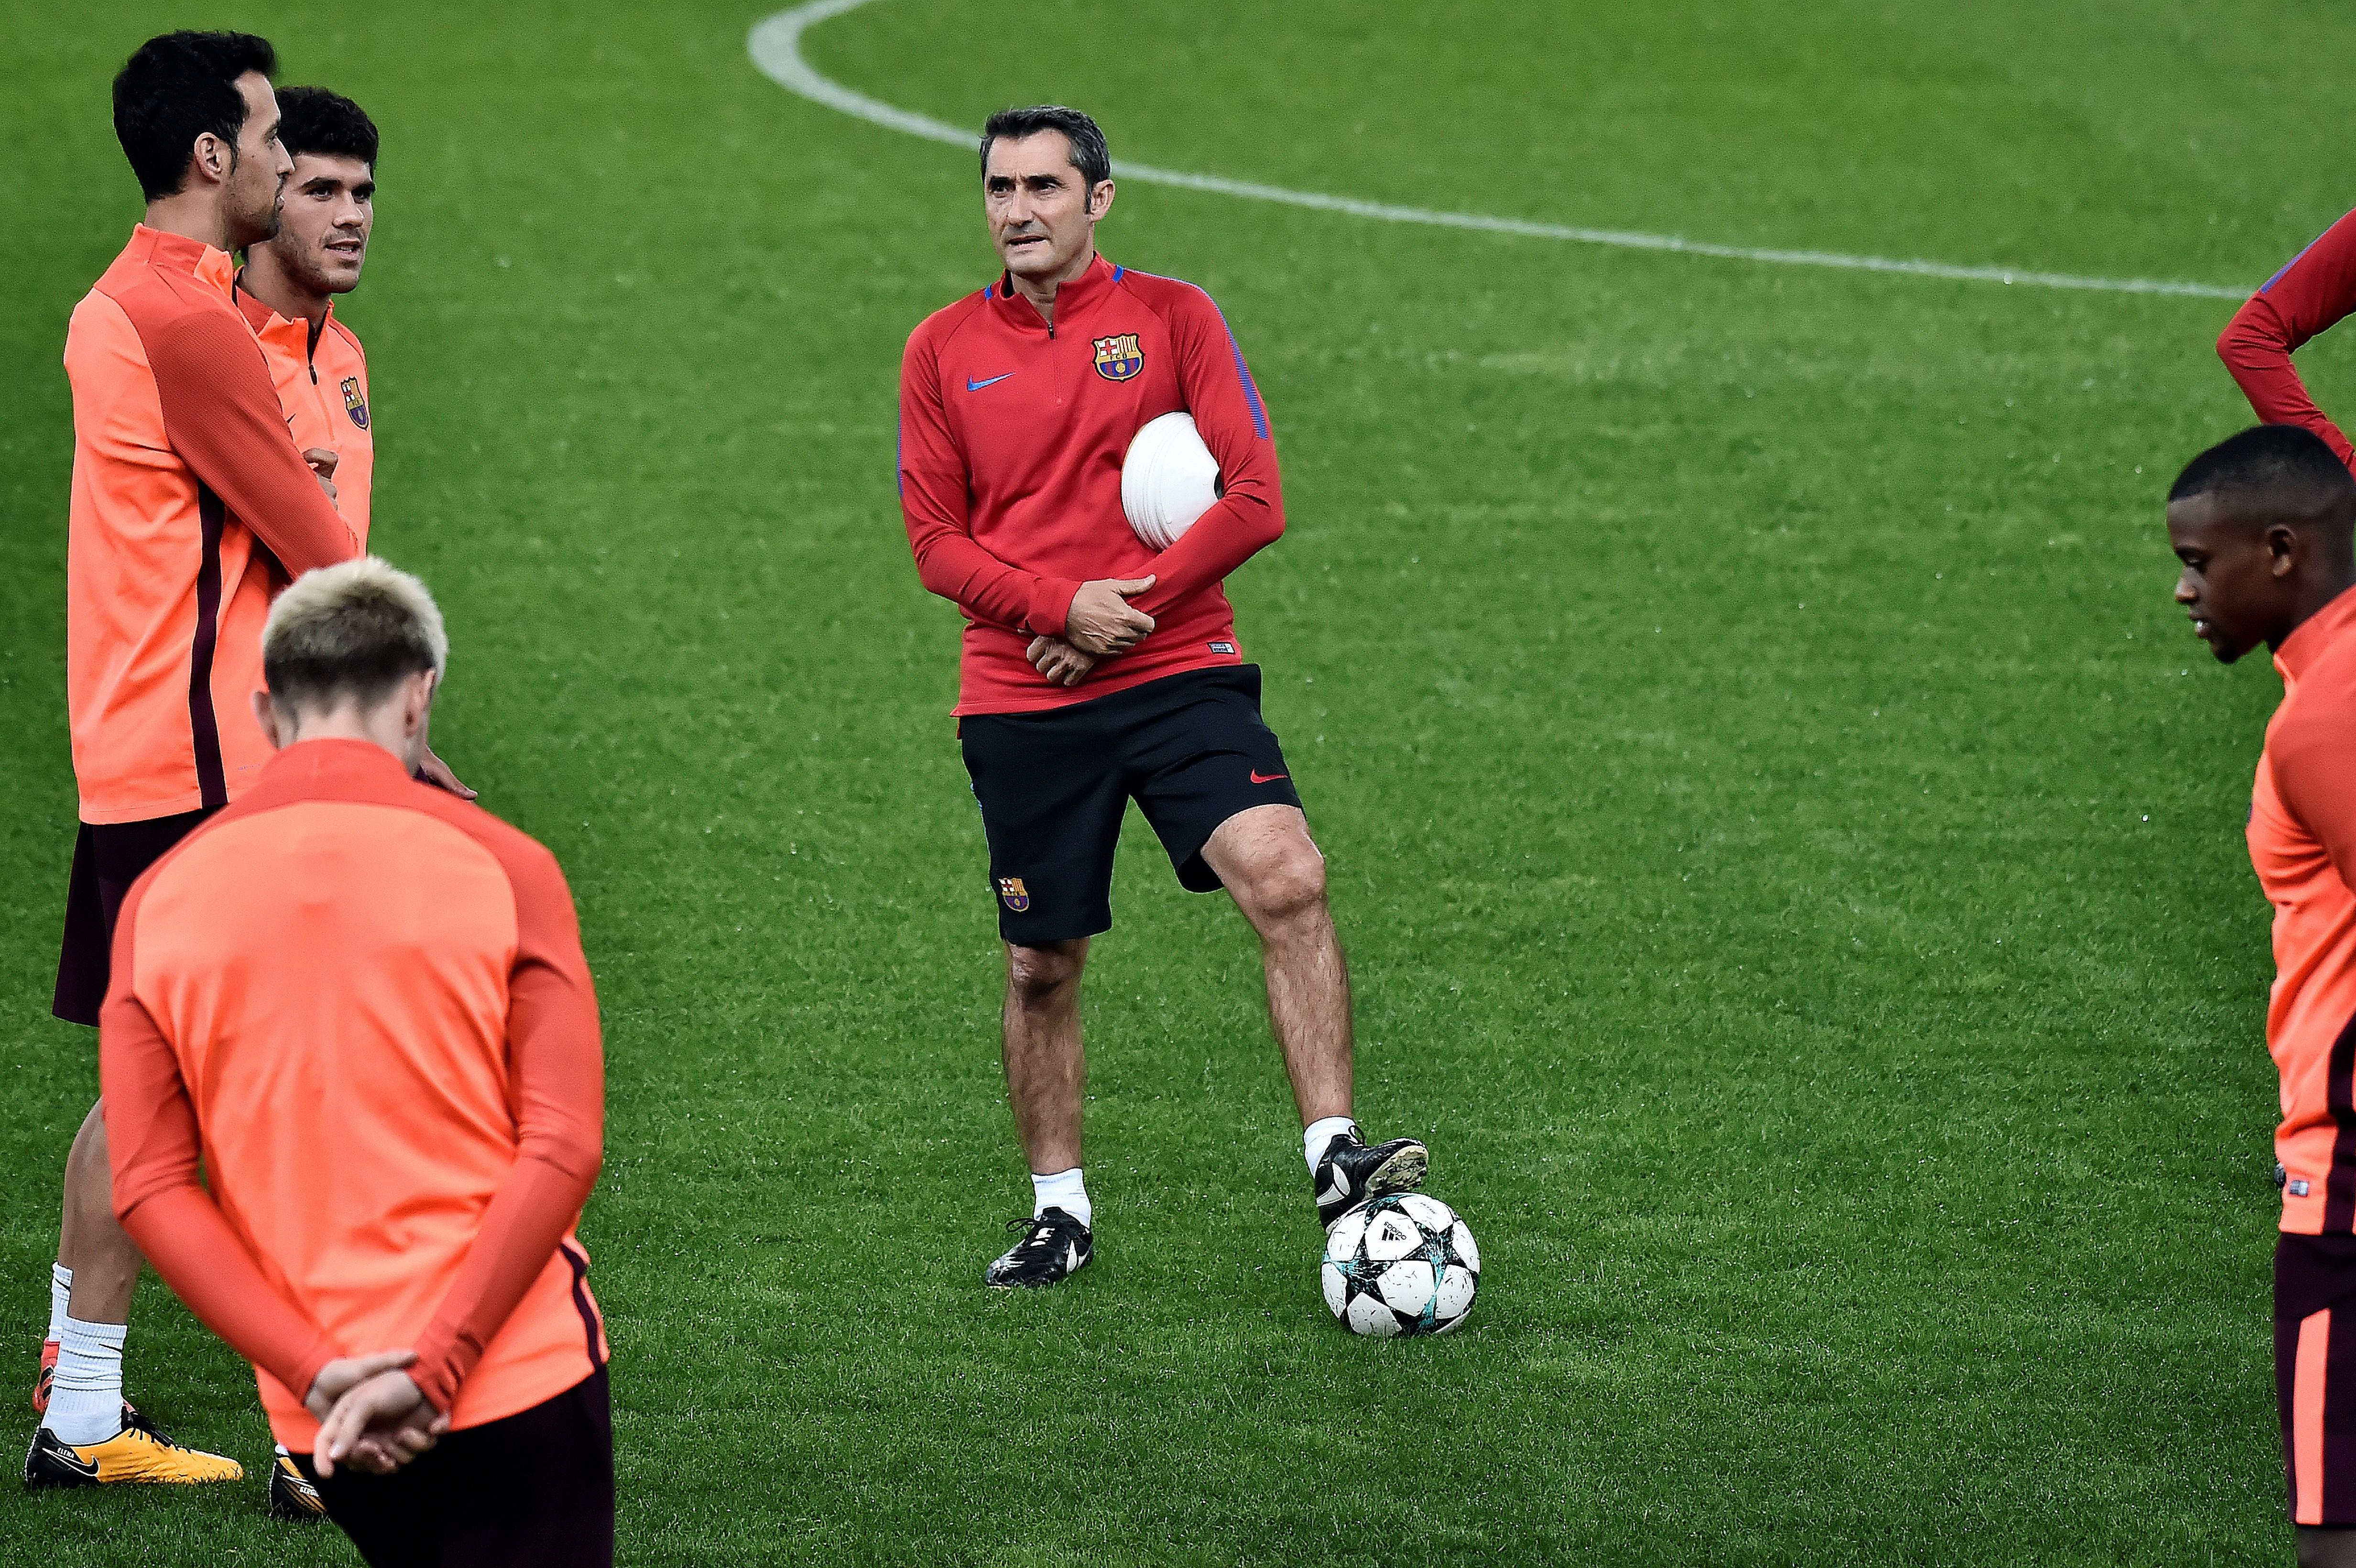 Barcelona's head coach Ernesto Valverde takes part in a Barcelona training at the Giorgos Karaiskakis stadium in Piraeus near Athens on October 30, 2017, on the eve of the UEFA Champions League match between Olympiakos and Barcelona.  / AFP PHOTO / LOUISA GOULIAMAKI        (Photo credit should read LOUISA GOULIAMAKI/AFP/Getty Images)